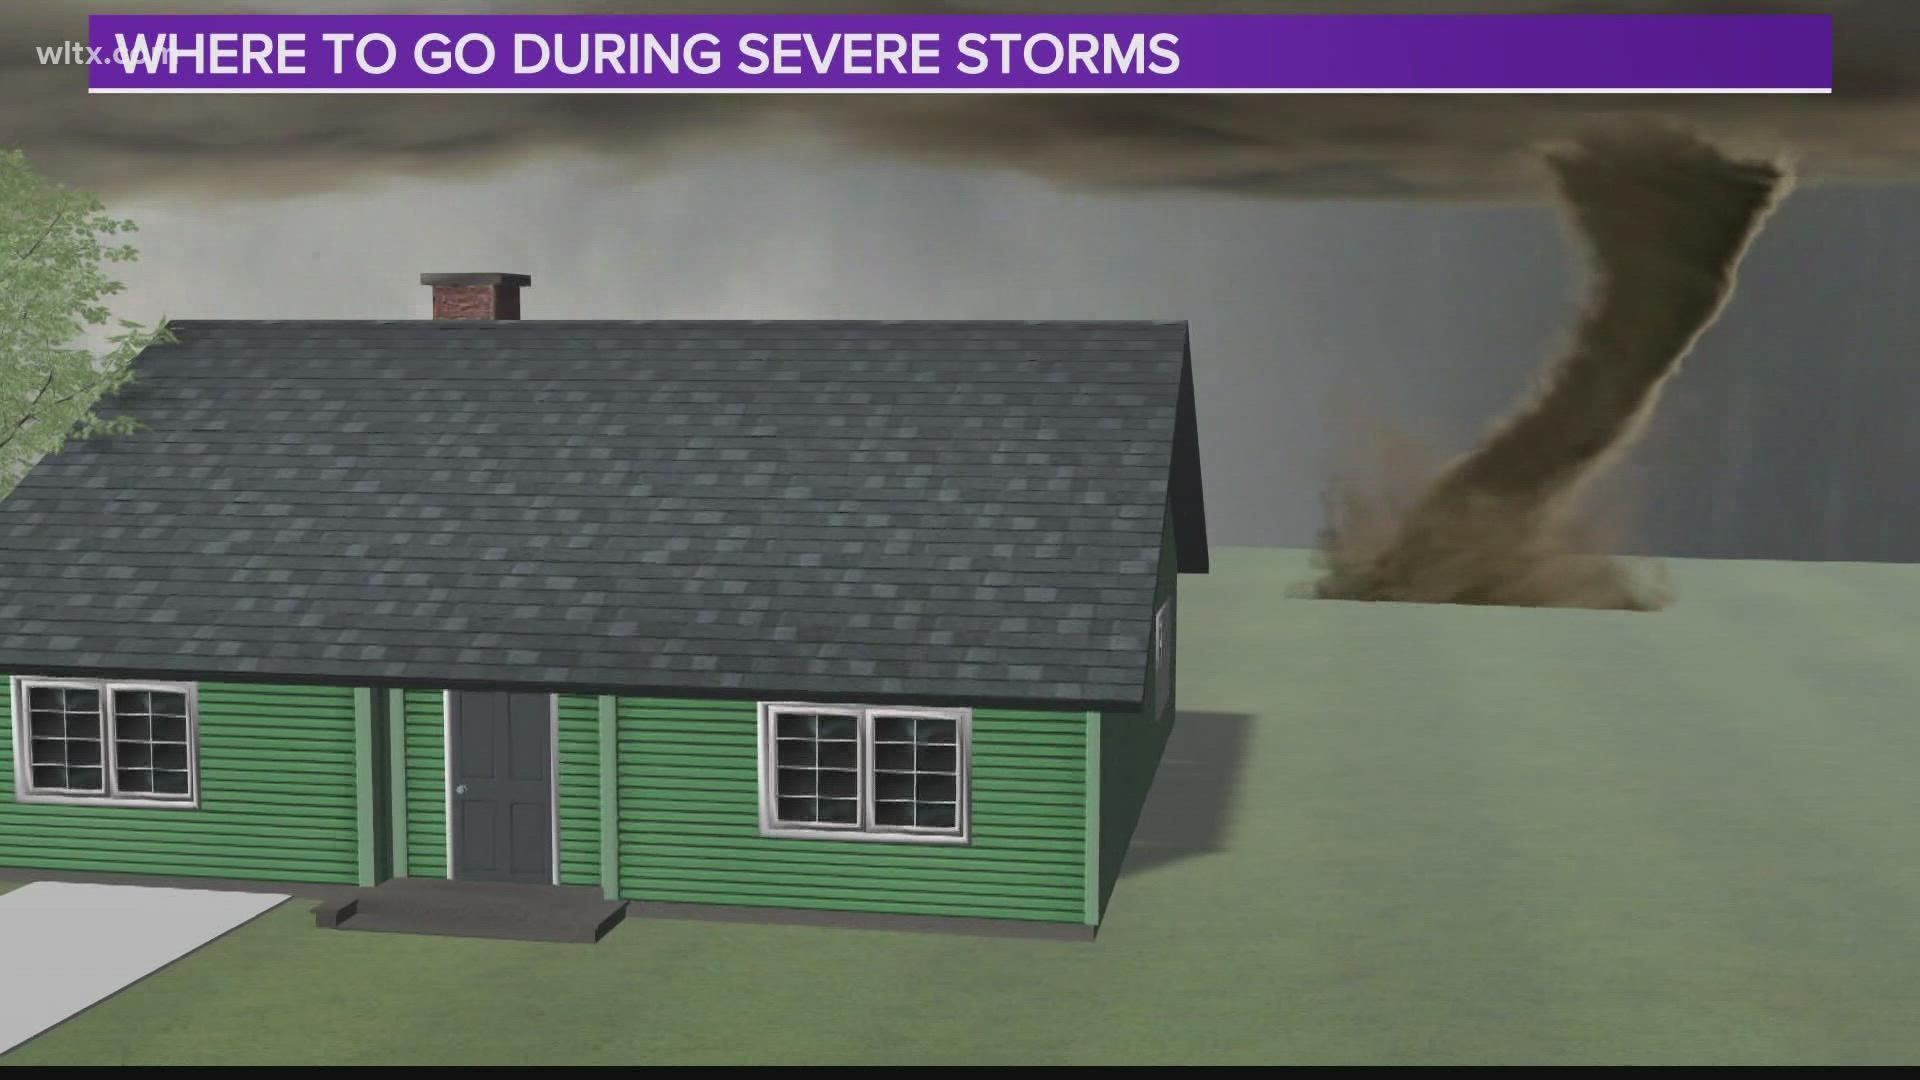 News 19 meteorologist Cory Smith shares how to be prepared for severe weather.